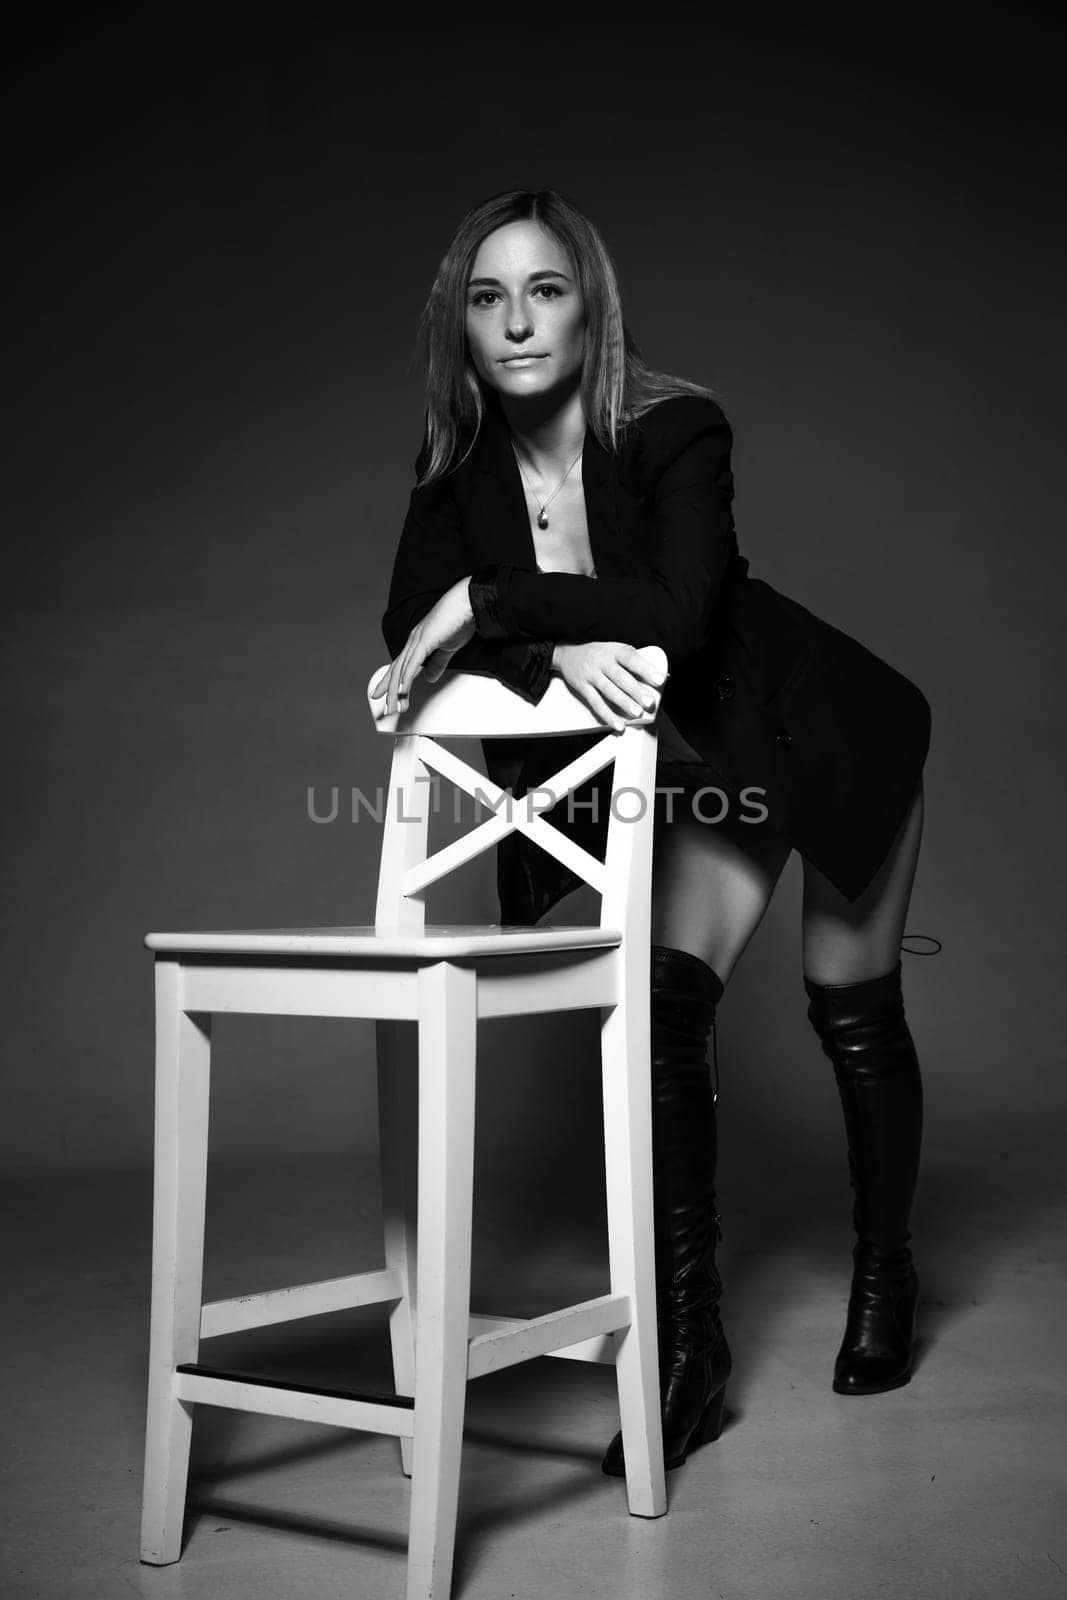 woman posing sitting on a chair in jacket and lingerie, black and white photo by EkaterinaPereslavtseva